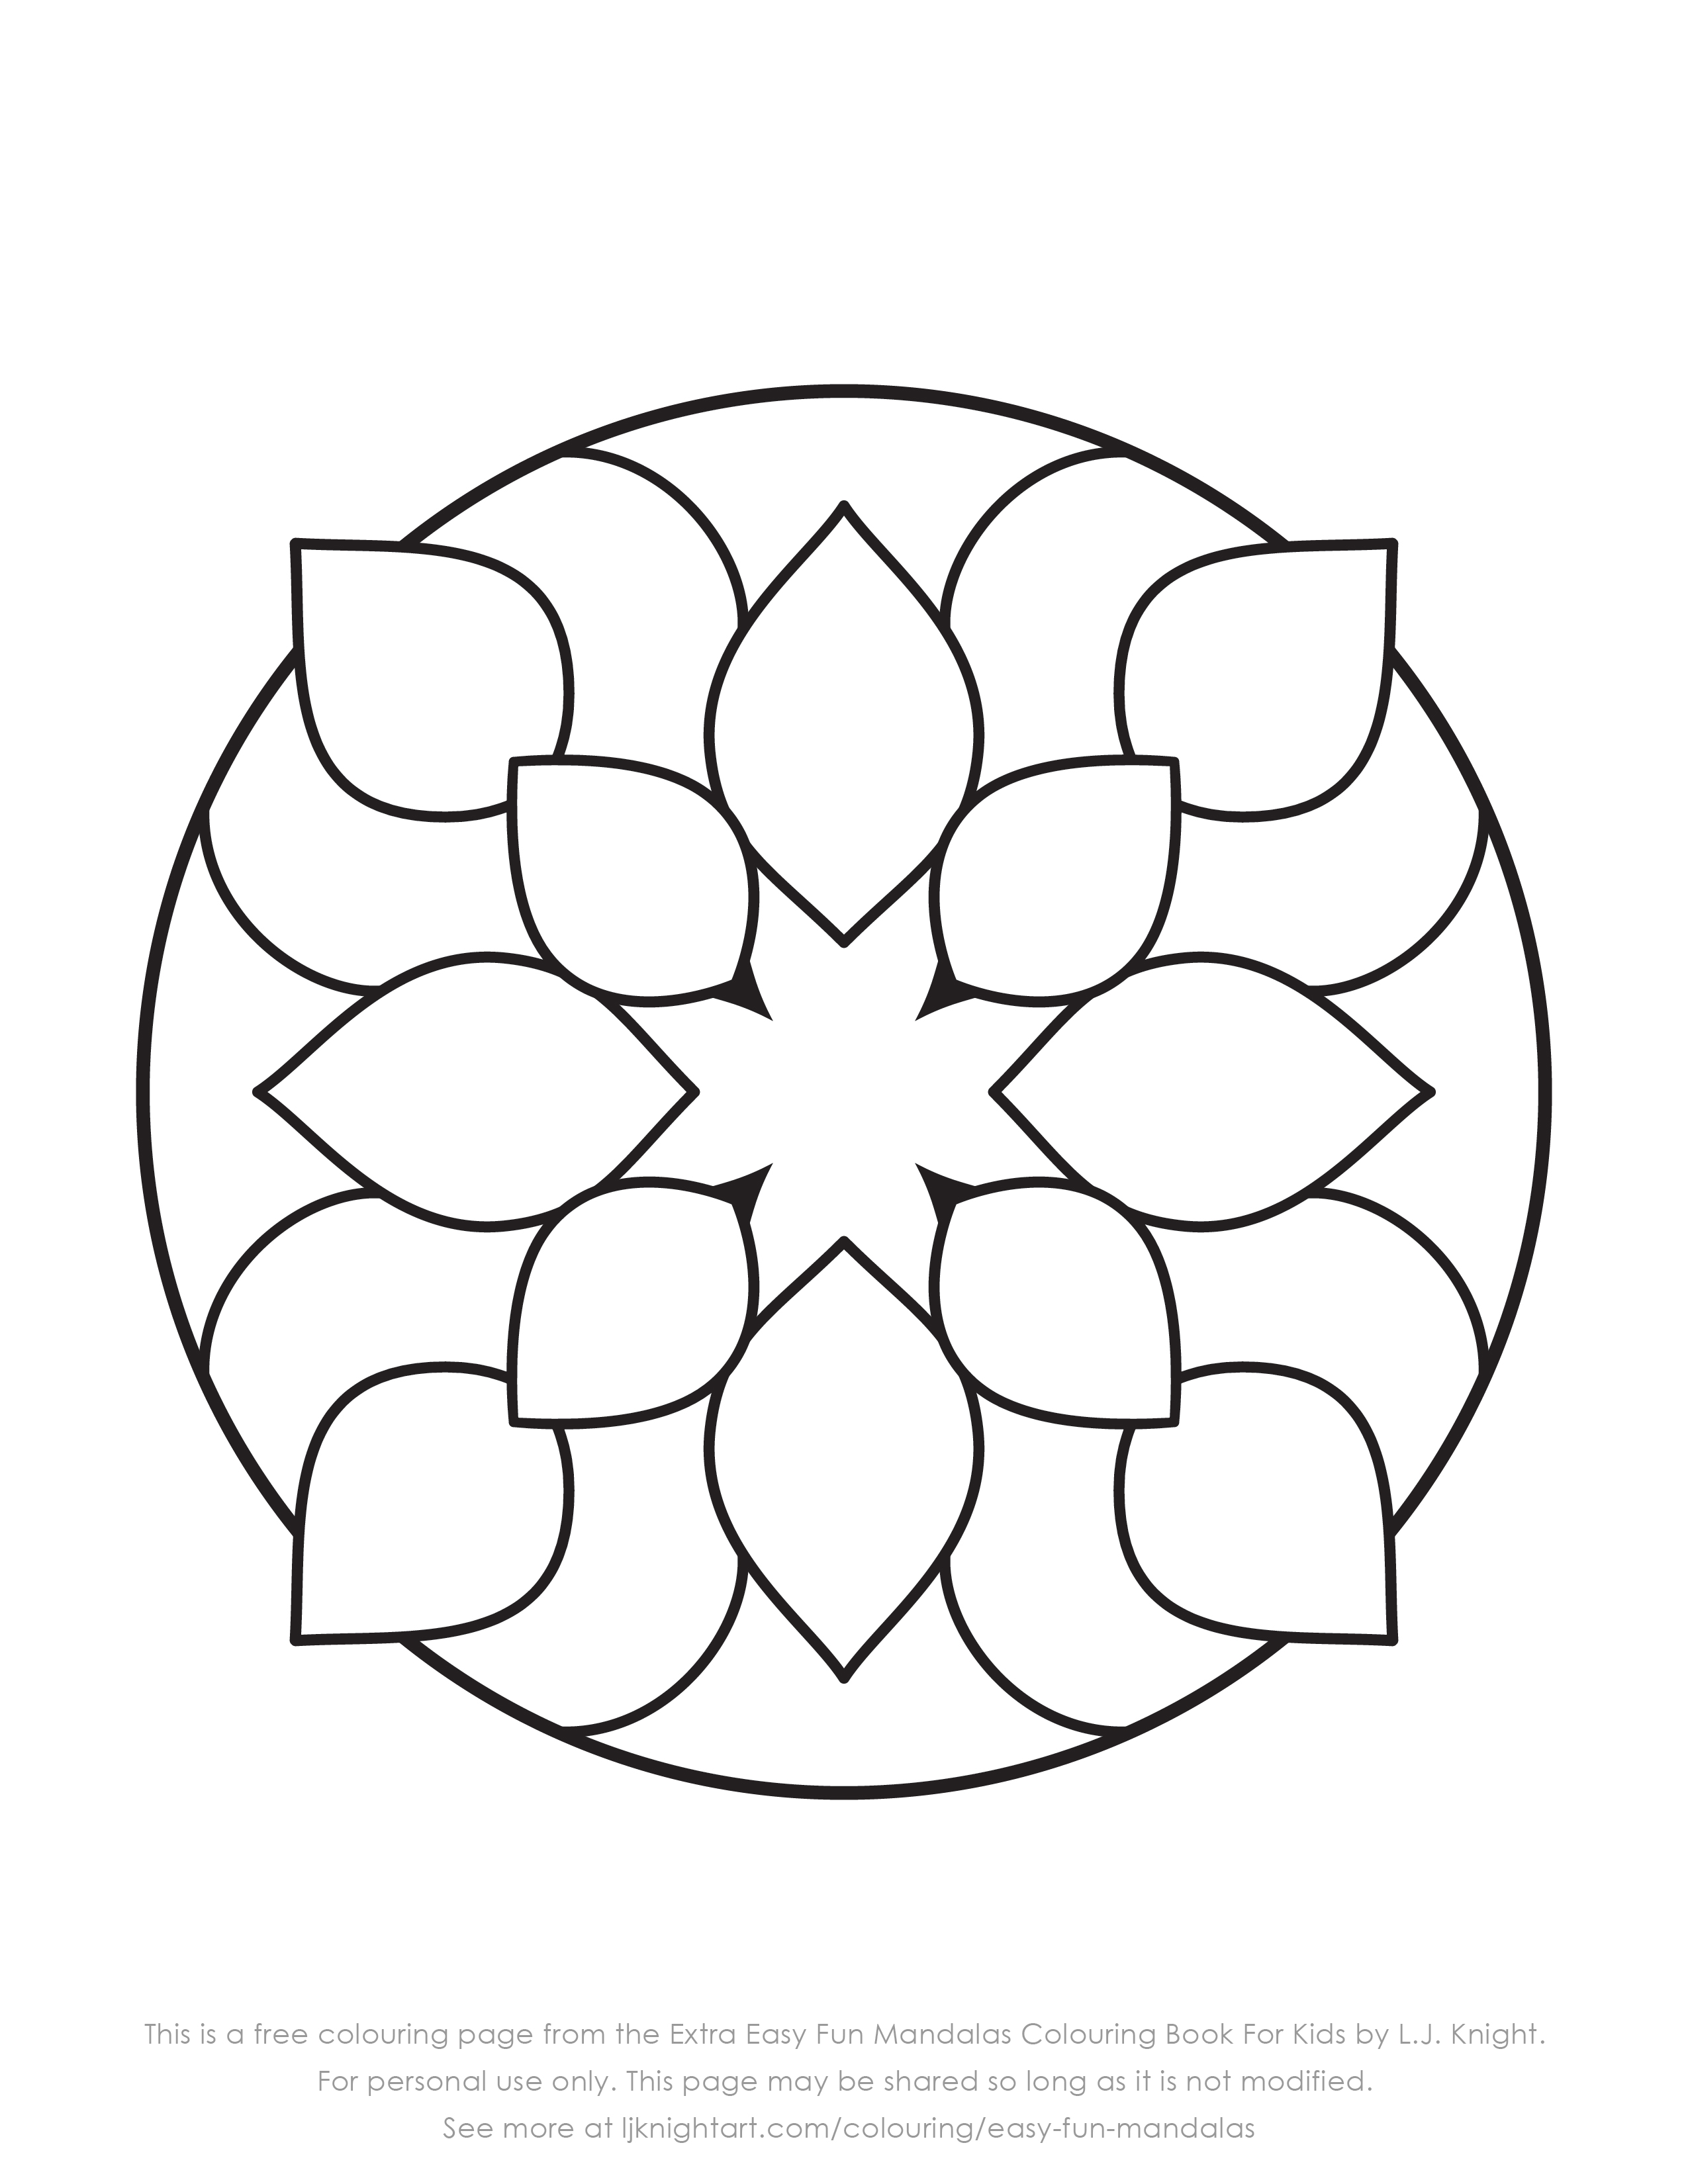 Free Very Simple Mandala Colouring Page For Kids Download   L.J. ...